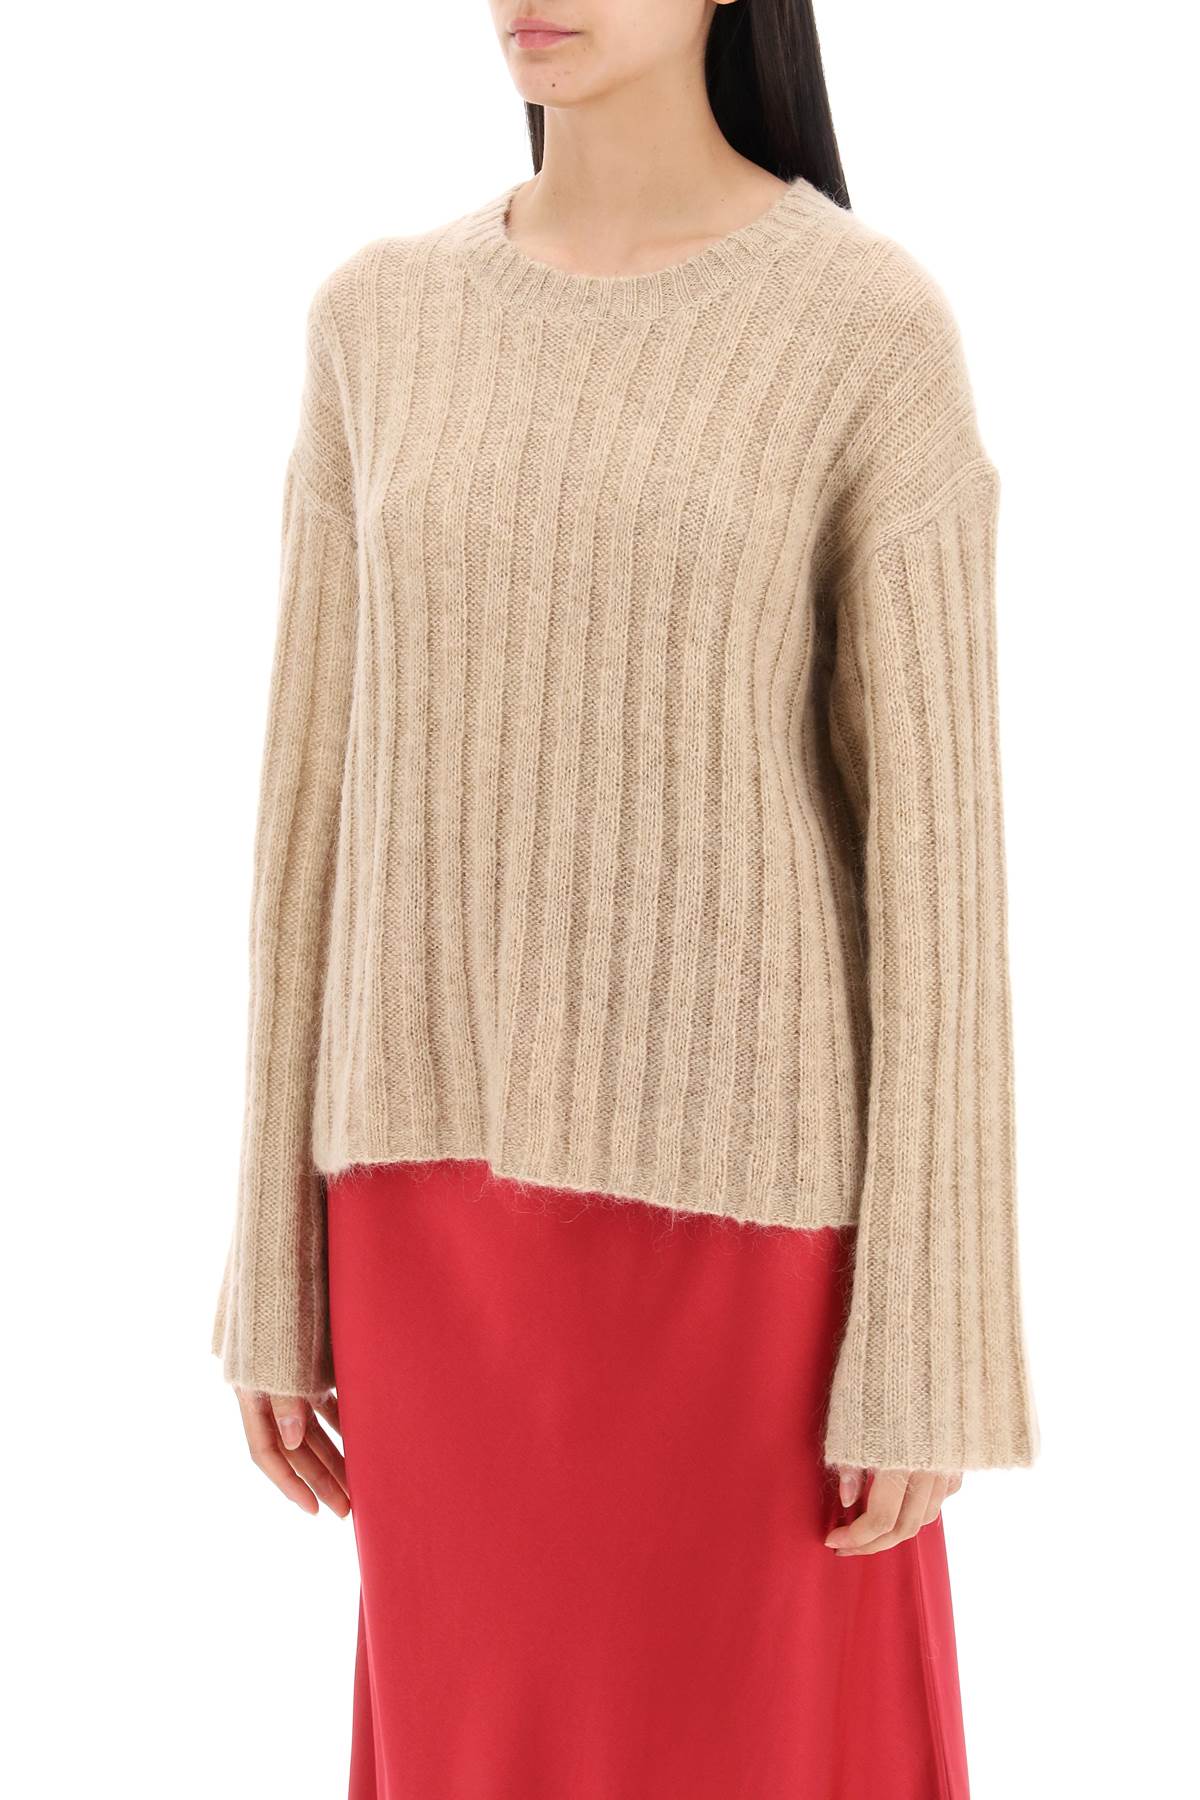 By Malene Birger Ribbed Knit Pullover Sweater   Beige